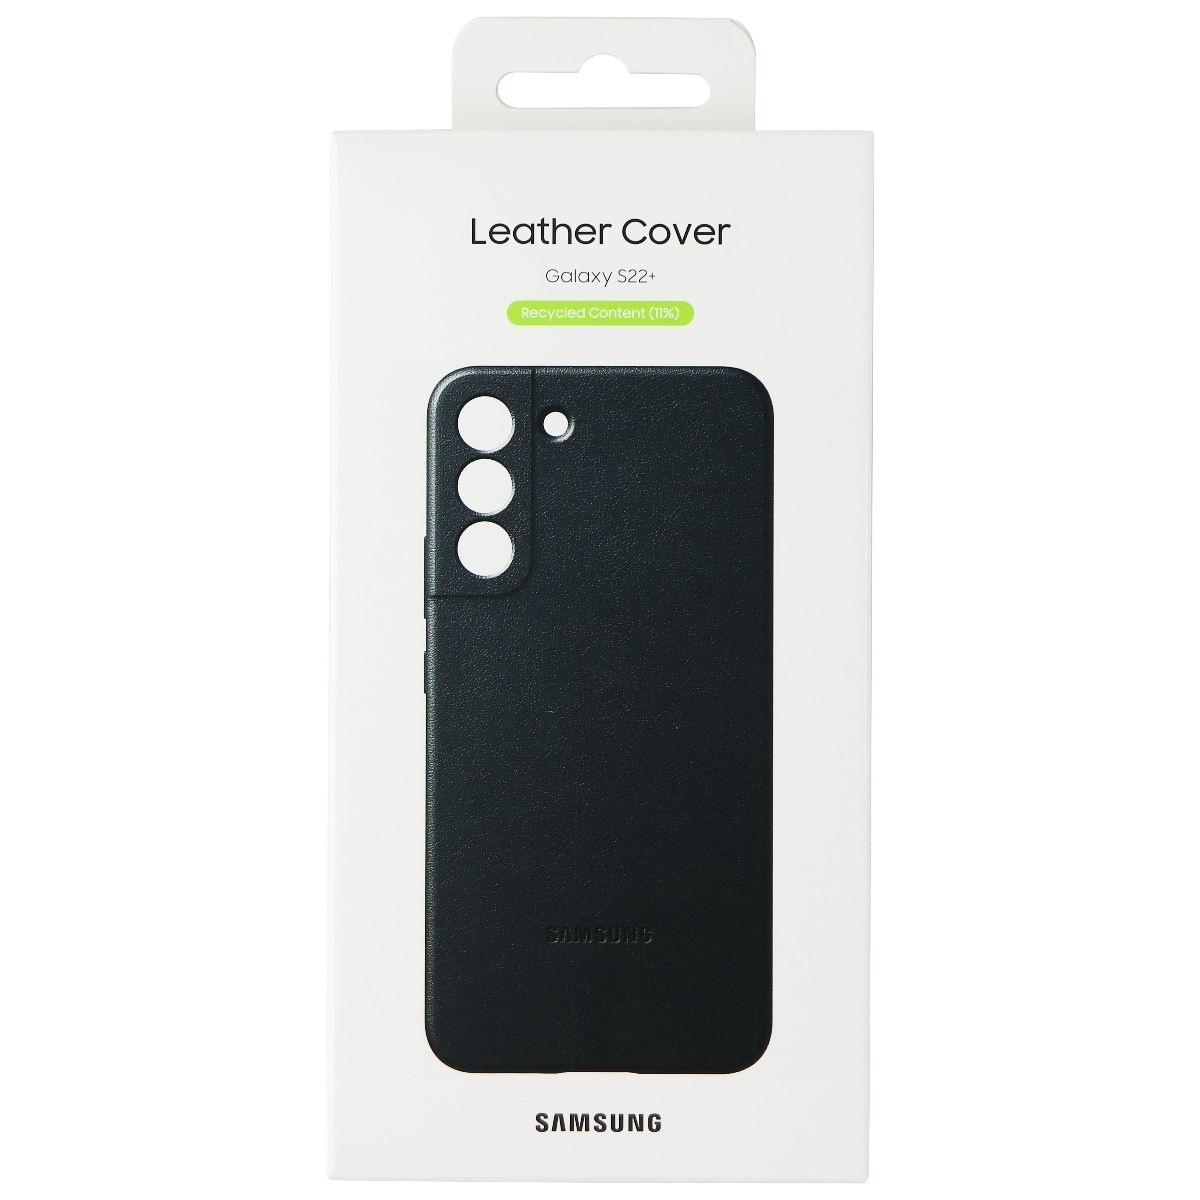 UPC 887276627243 product image for Samsung Leather Cover Case for Samsung Galaxy (S22+) - Green | upcitemdb.com